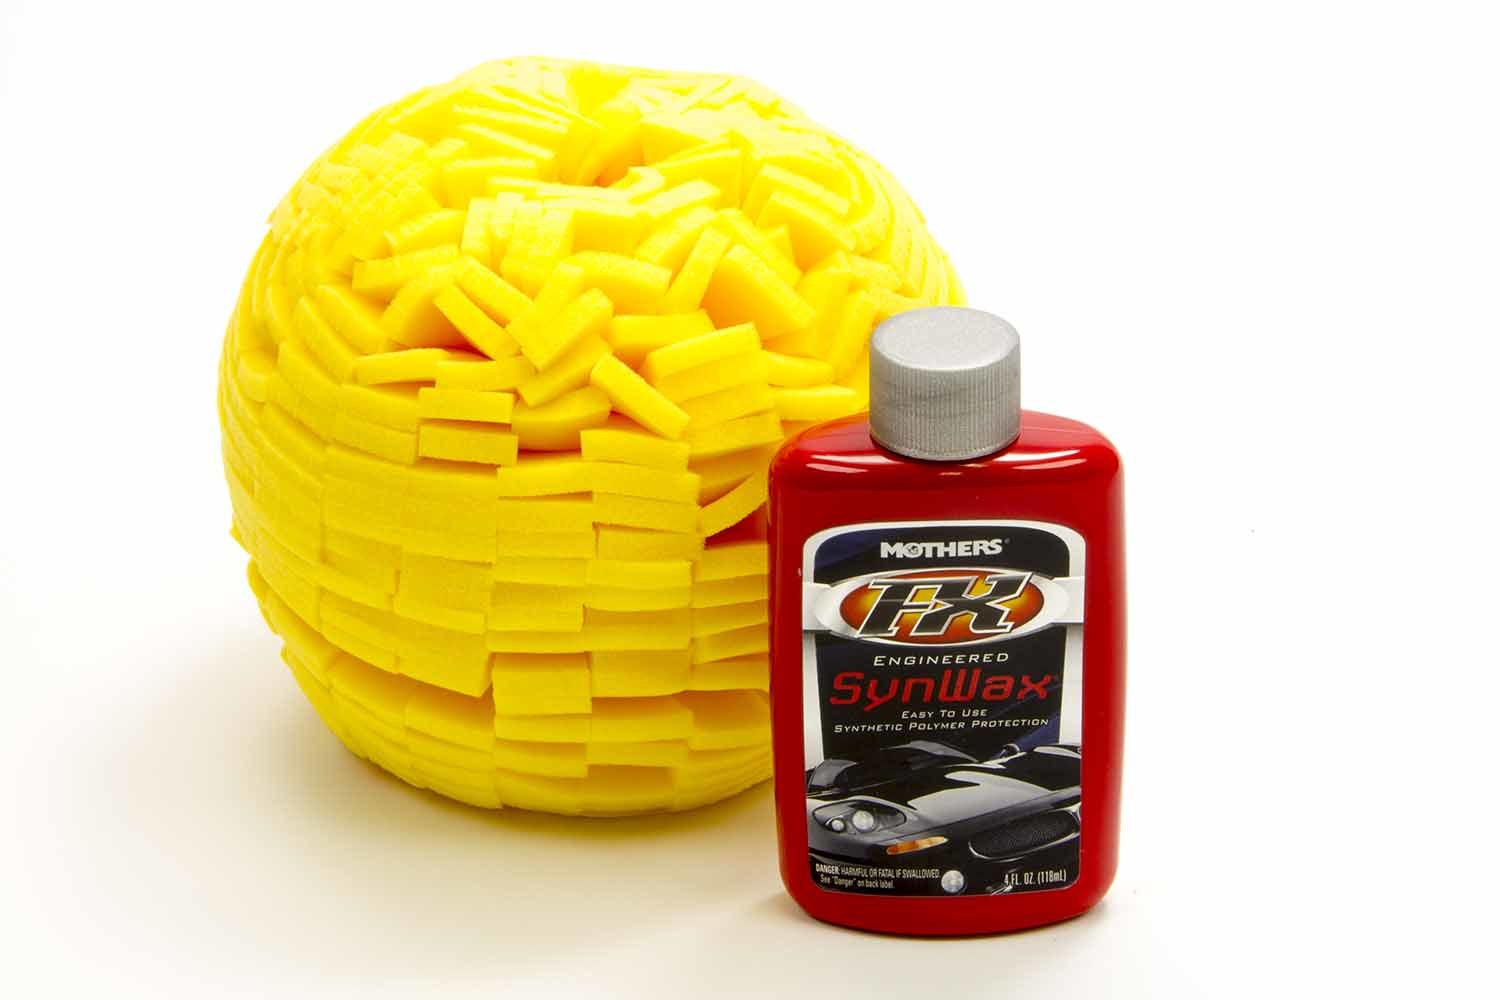 MOTHERS Buffing Ball, Powerball 4 Paint, Each